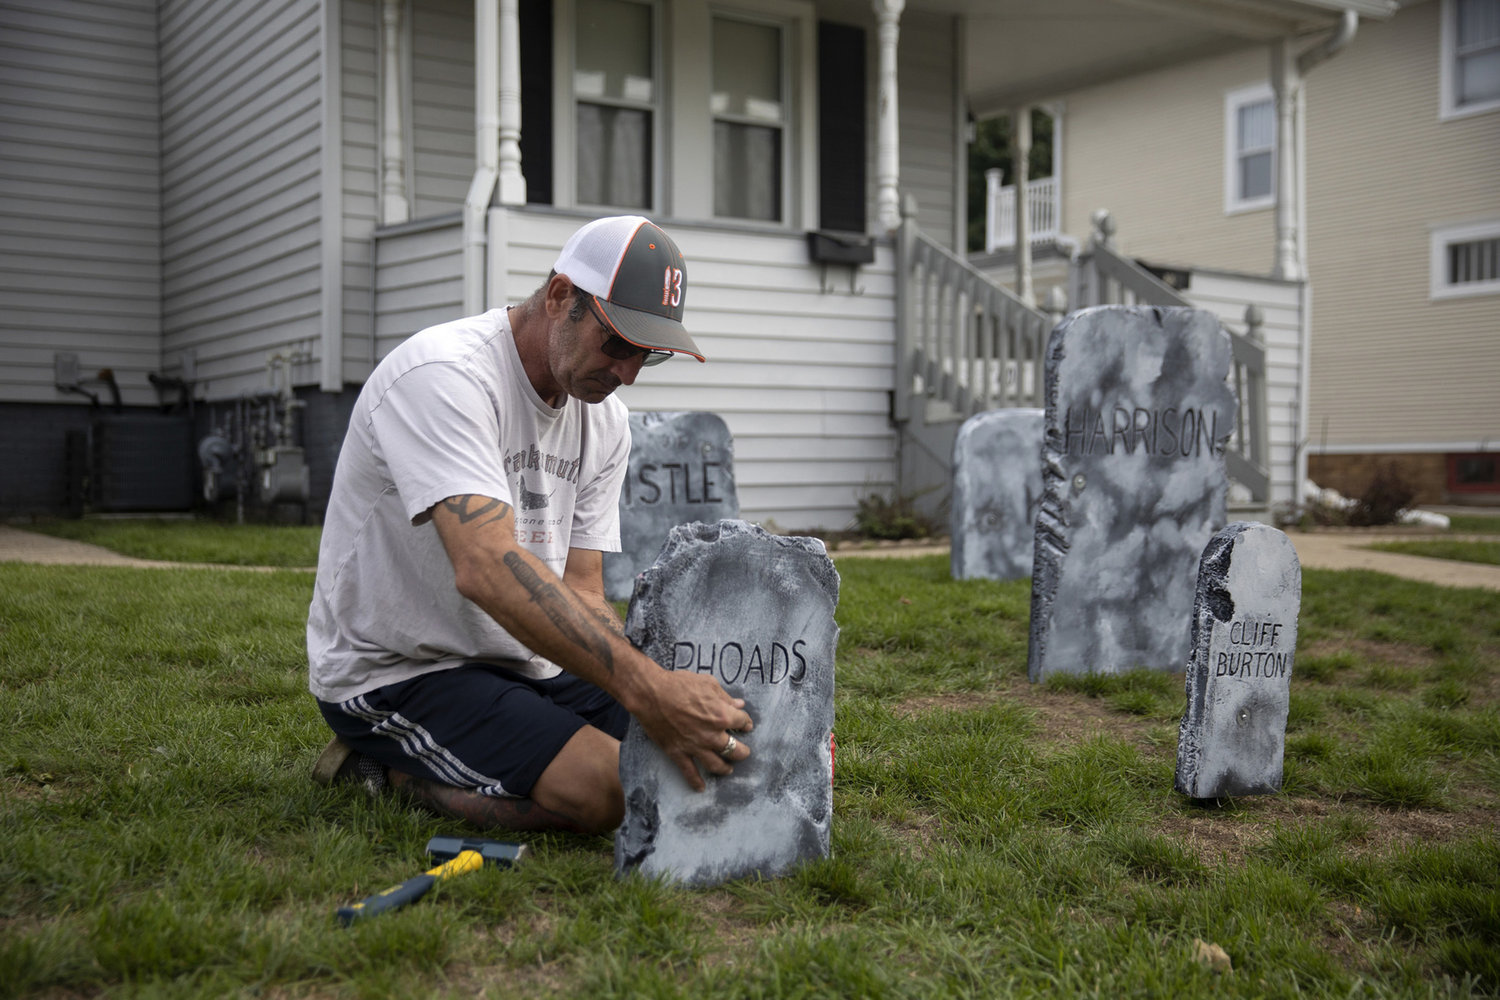 Chris Wade, 52, puts up Halloween decorations in his yard on Tuesday, Oct. 19, 2021, in Kenosha, Wisconsin, after sharing his thoughts on the mood in town as the trial of Kyle Rittenhouse approaches, set to begin Nov. 1.  (Erin Hooley/Chicago Tribune/TNS)